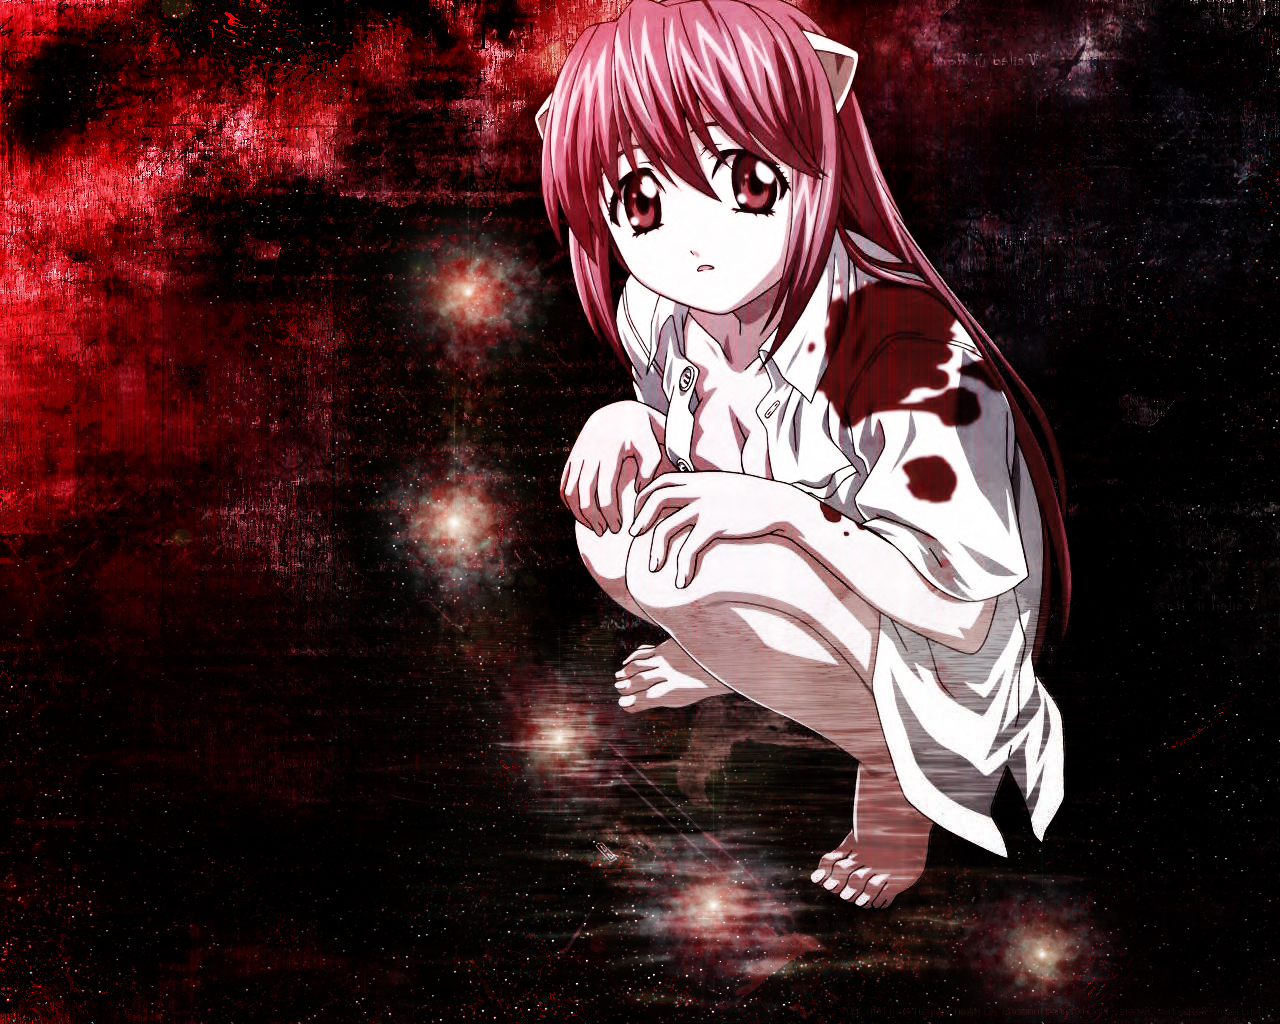 99 Elfen Lied HD Wallpapers | Backgrounds - Wallpaper Abyss - Page 2